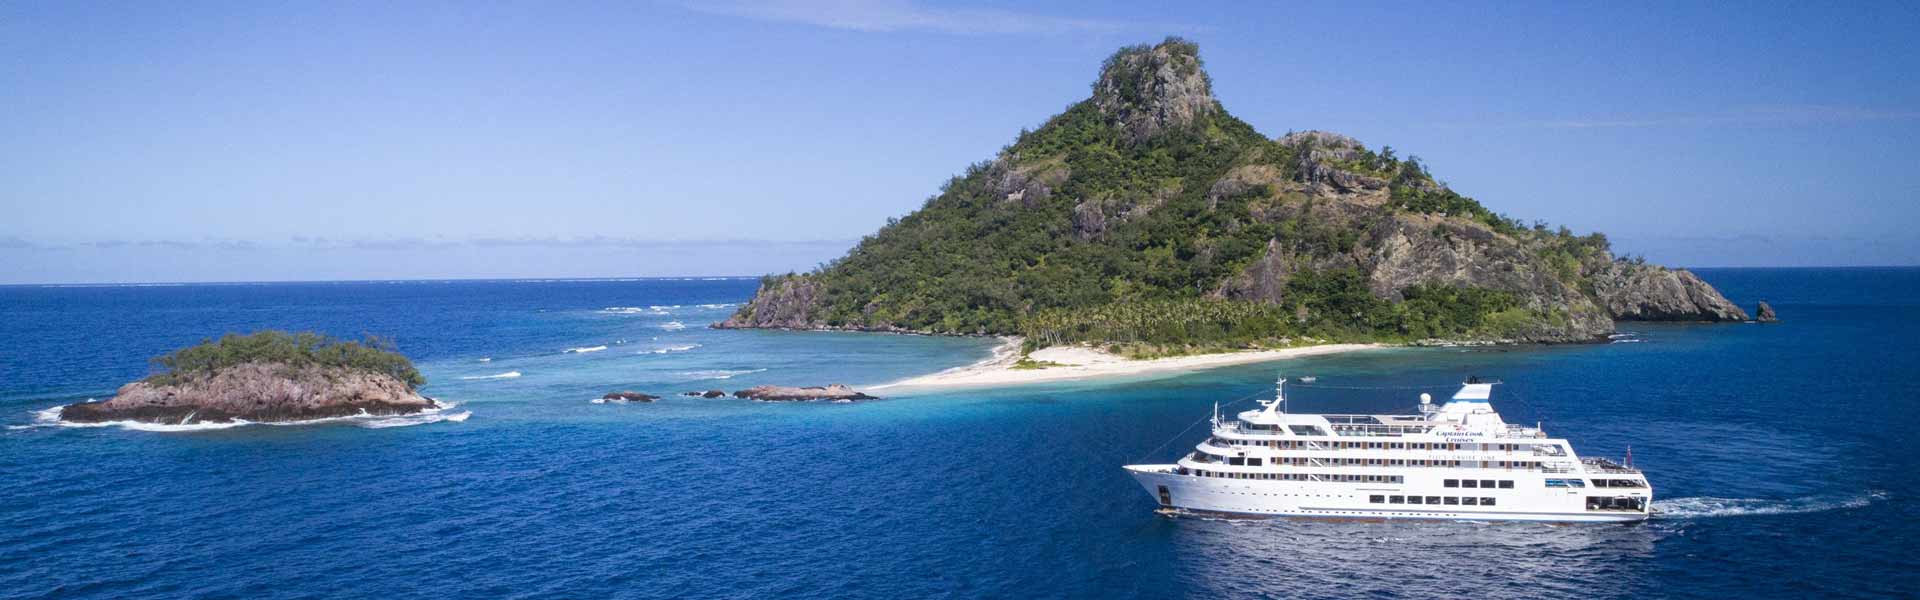 9 Nights Family Package (7 Nights Lau & Kadavu Discovery Cruise) with Flights, Transfers and More!